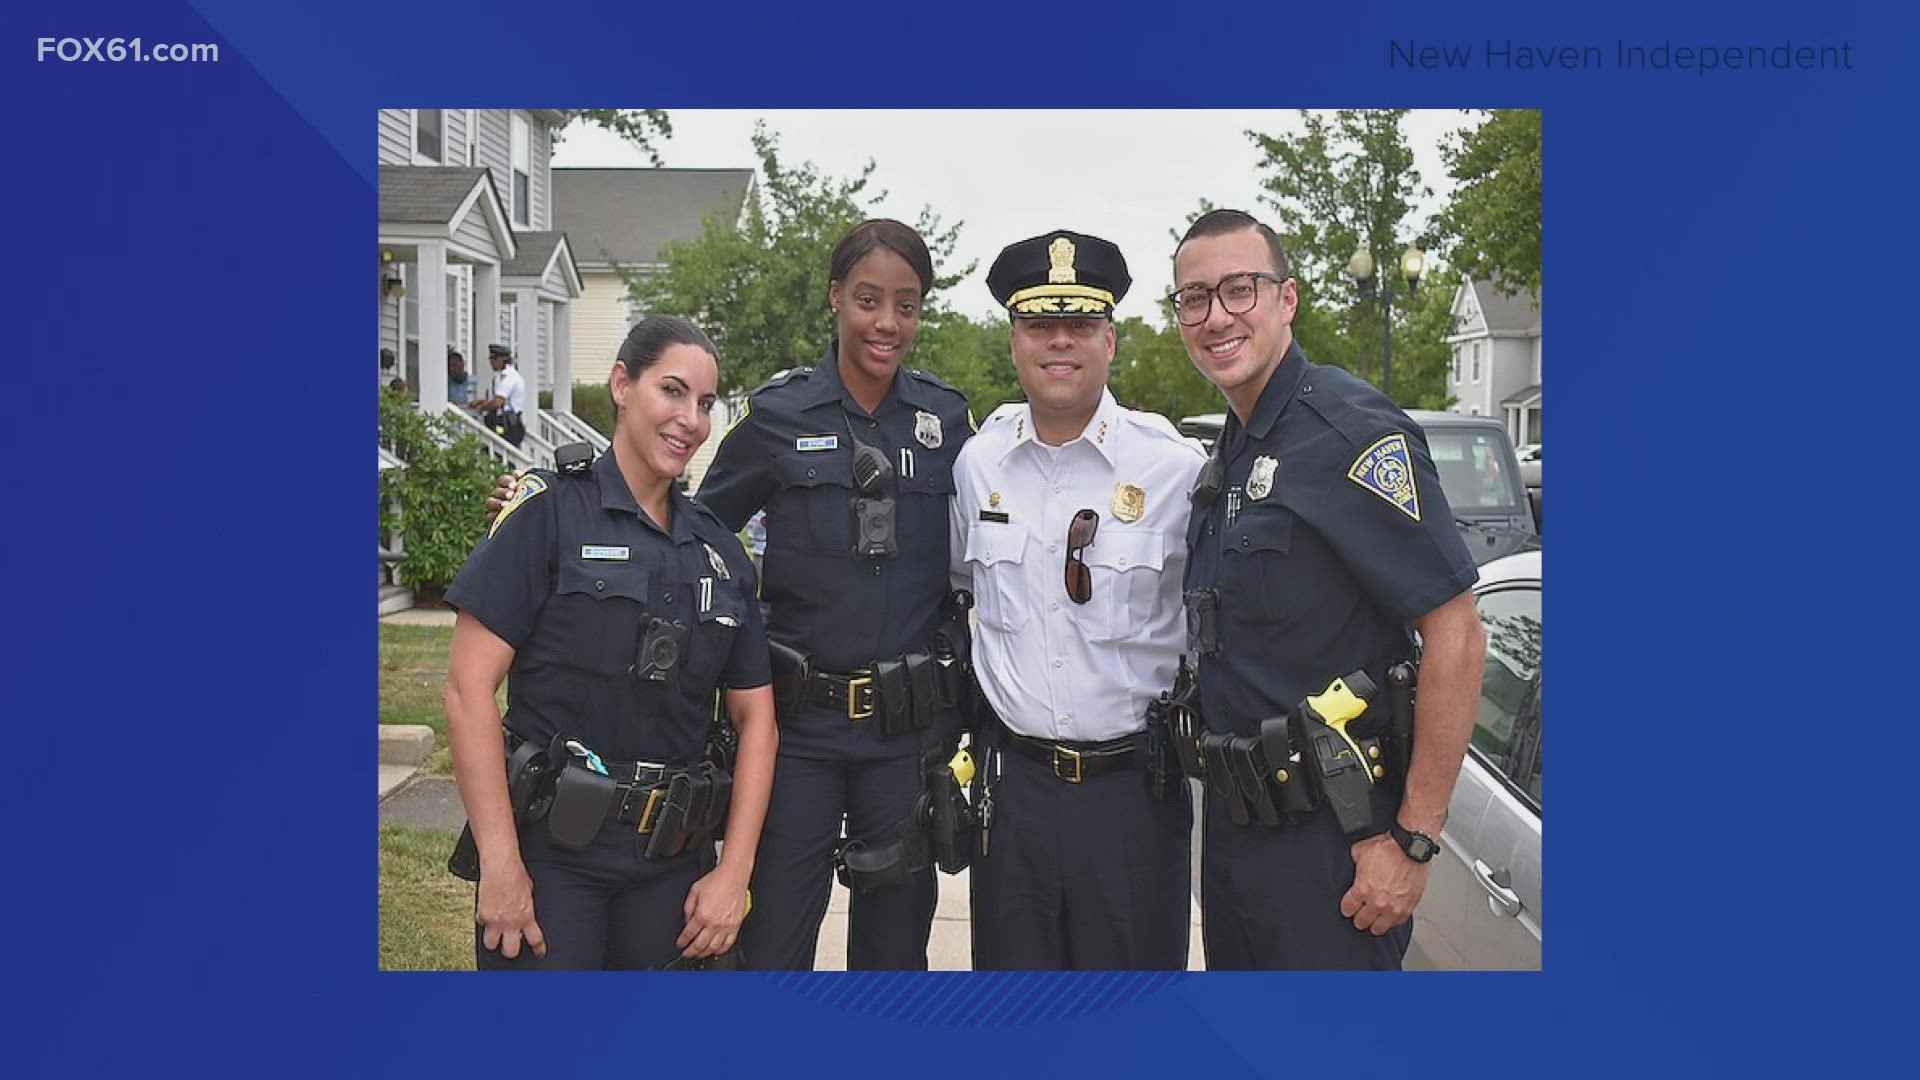 The officer has been a member of the New Haven police department for over three years.